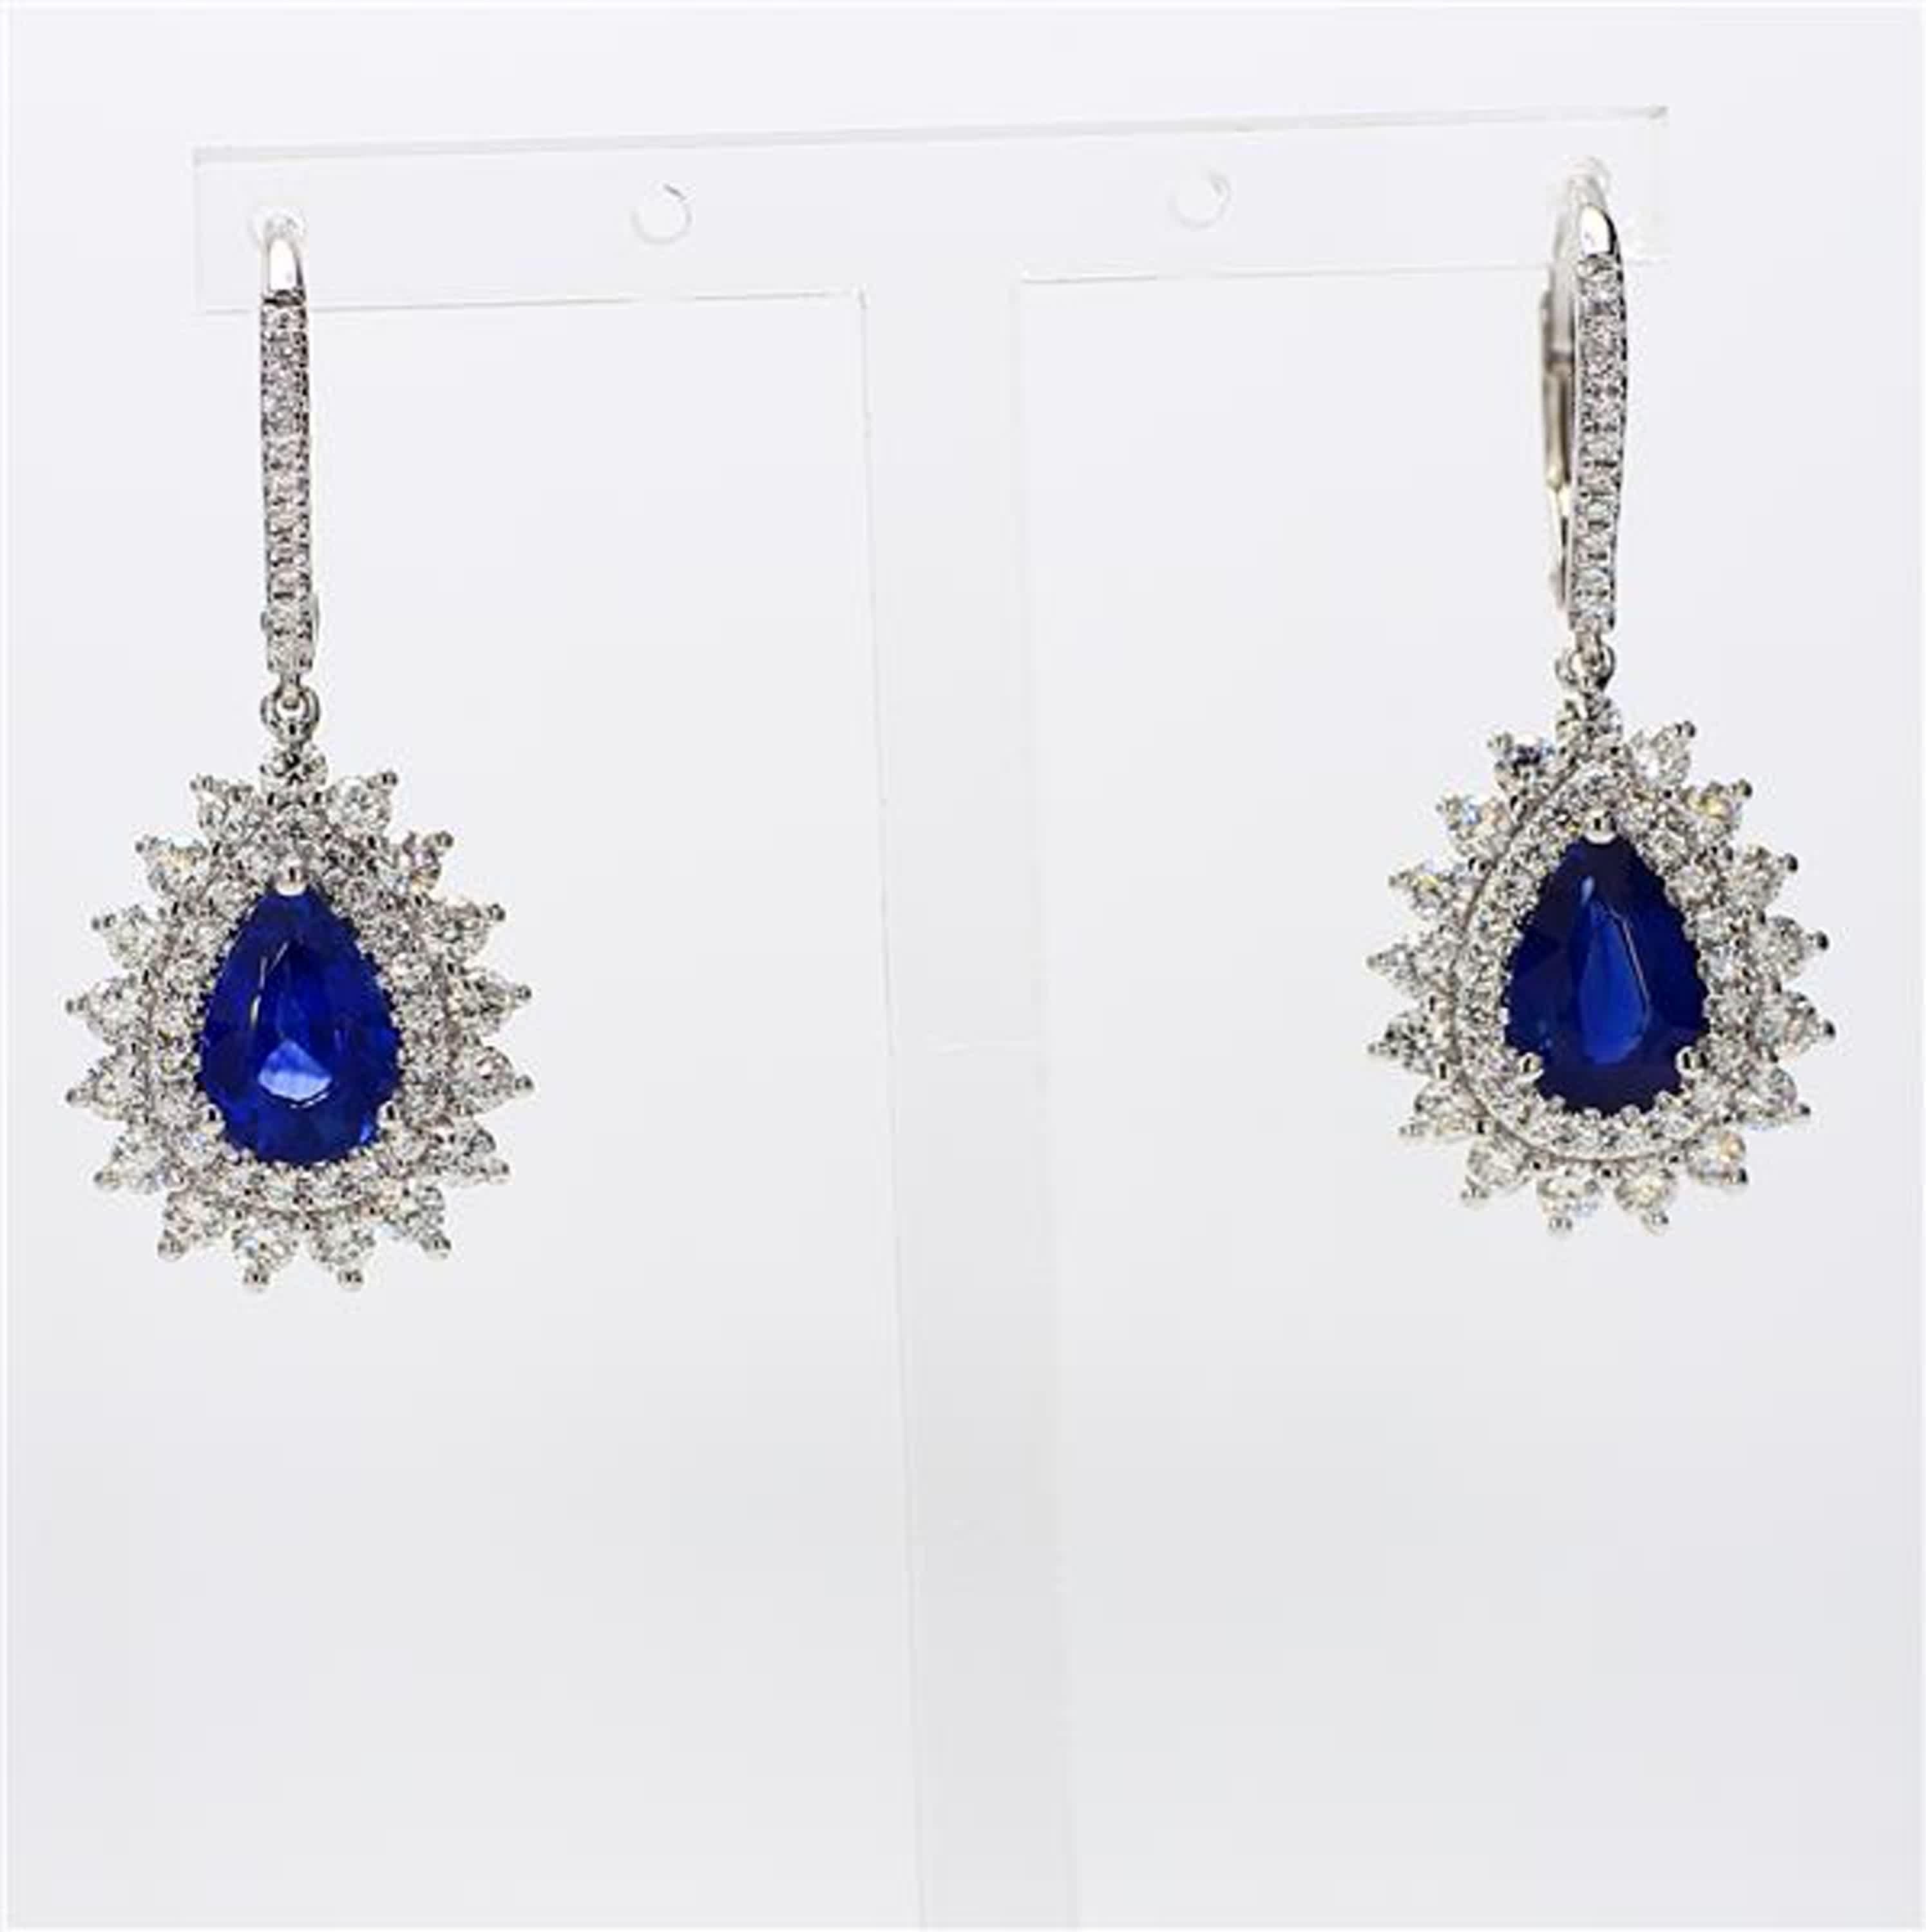 RareGemWorld's classic sapphire earrings. Mounted in a beautiful 18K White Gold setting with natural pear cut blue sapphires. The sapphires are surrounded by natural round white diamond melee as well as diamonds throughout the earring. These